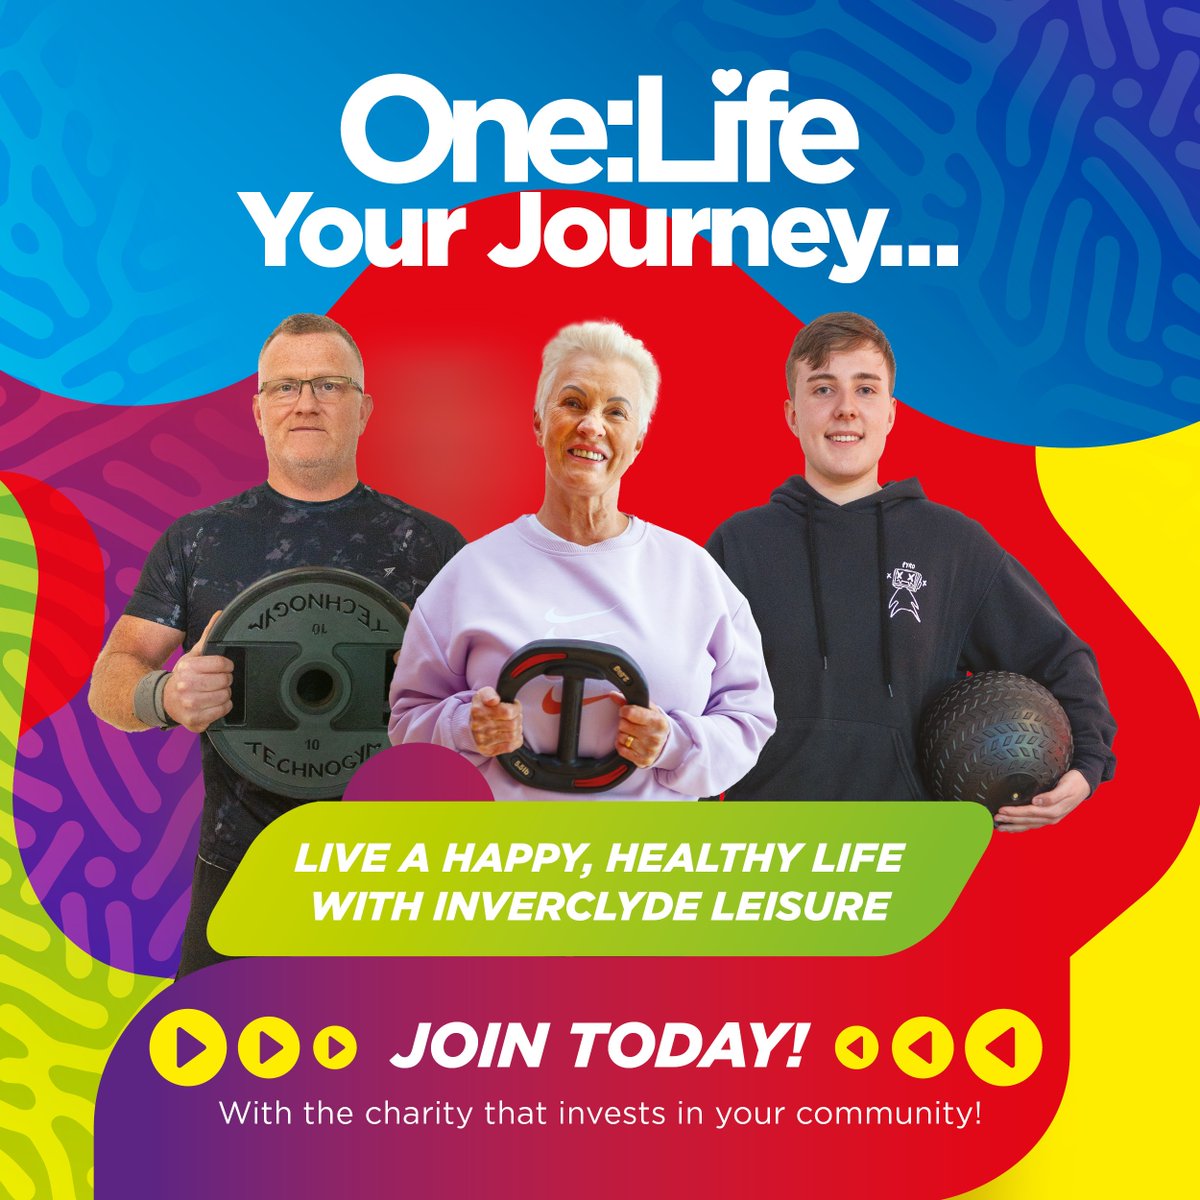 Do you want to boost your energy levels, improve your mood, or feel more self-confident? Increasing your activity levels can help achieve this, and at Inverclyde Leisure there really is something for everyone to enjoy. Become a One:Life member today 👇 ilgetactive.com